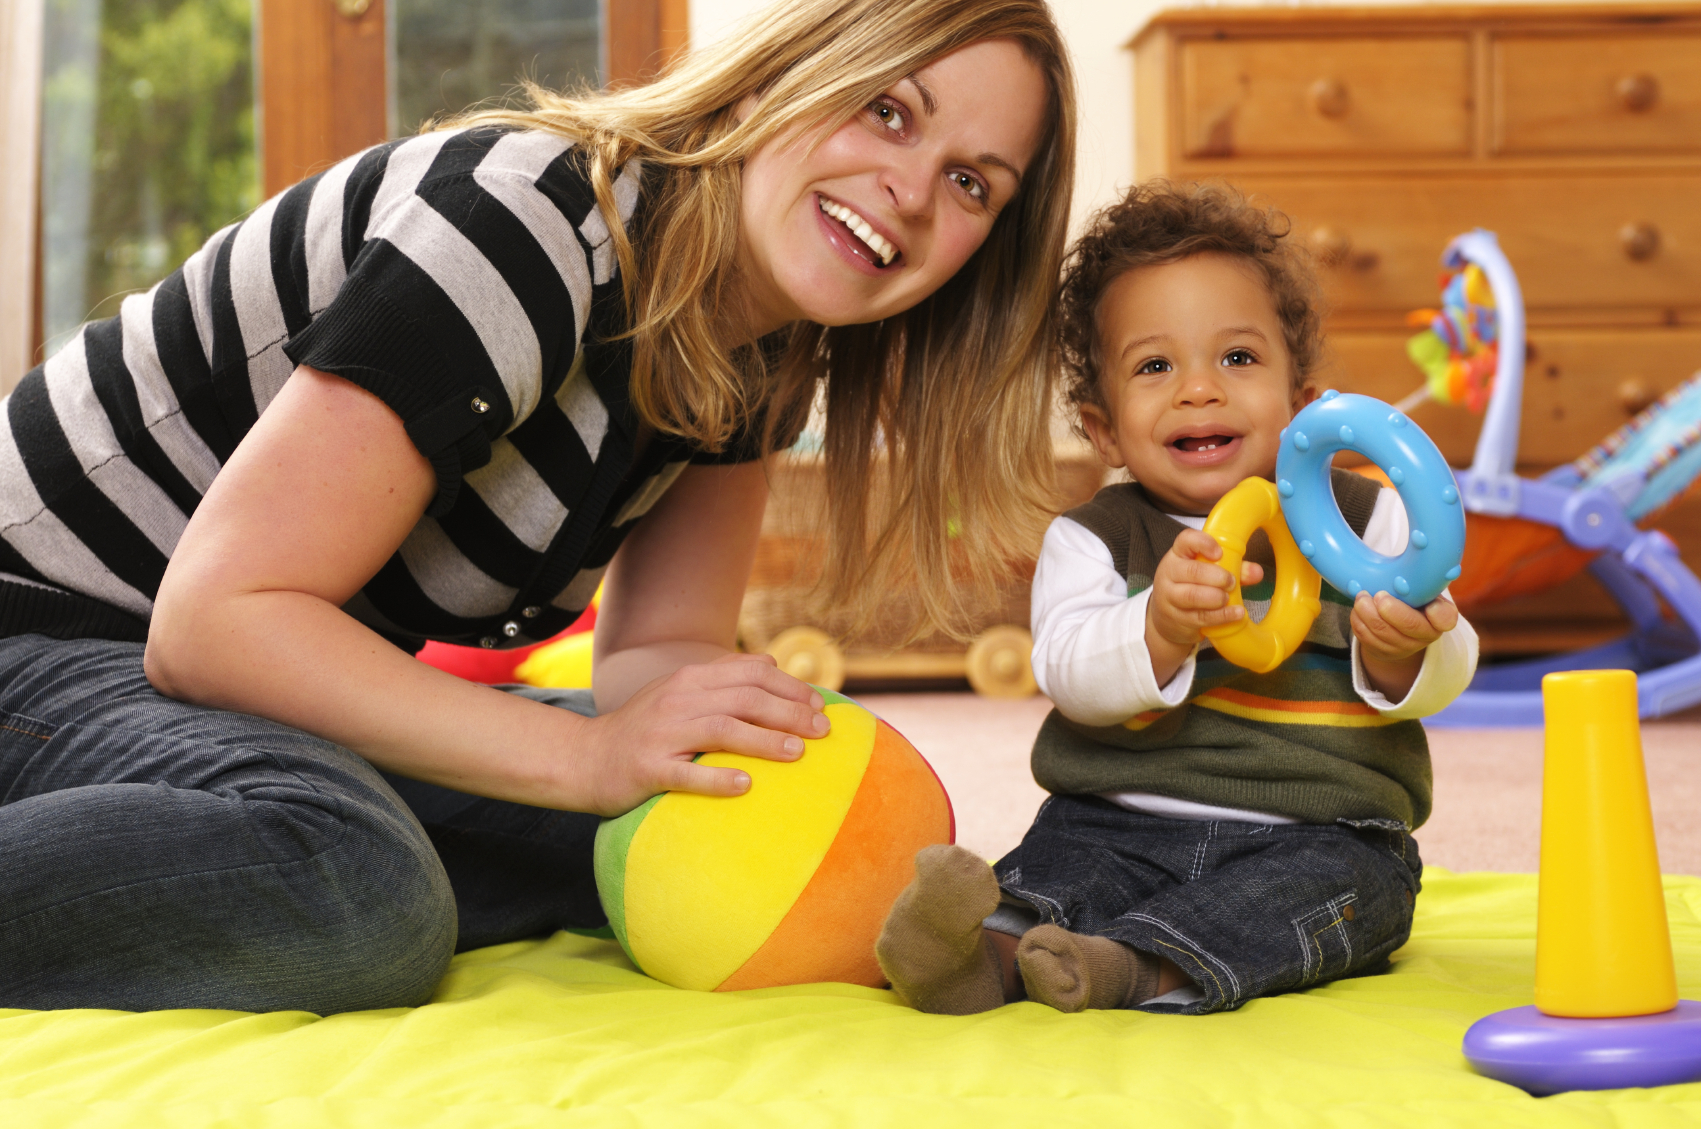 Caring for Children in Your Home childcare training course